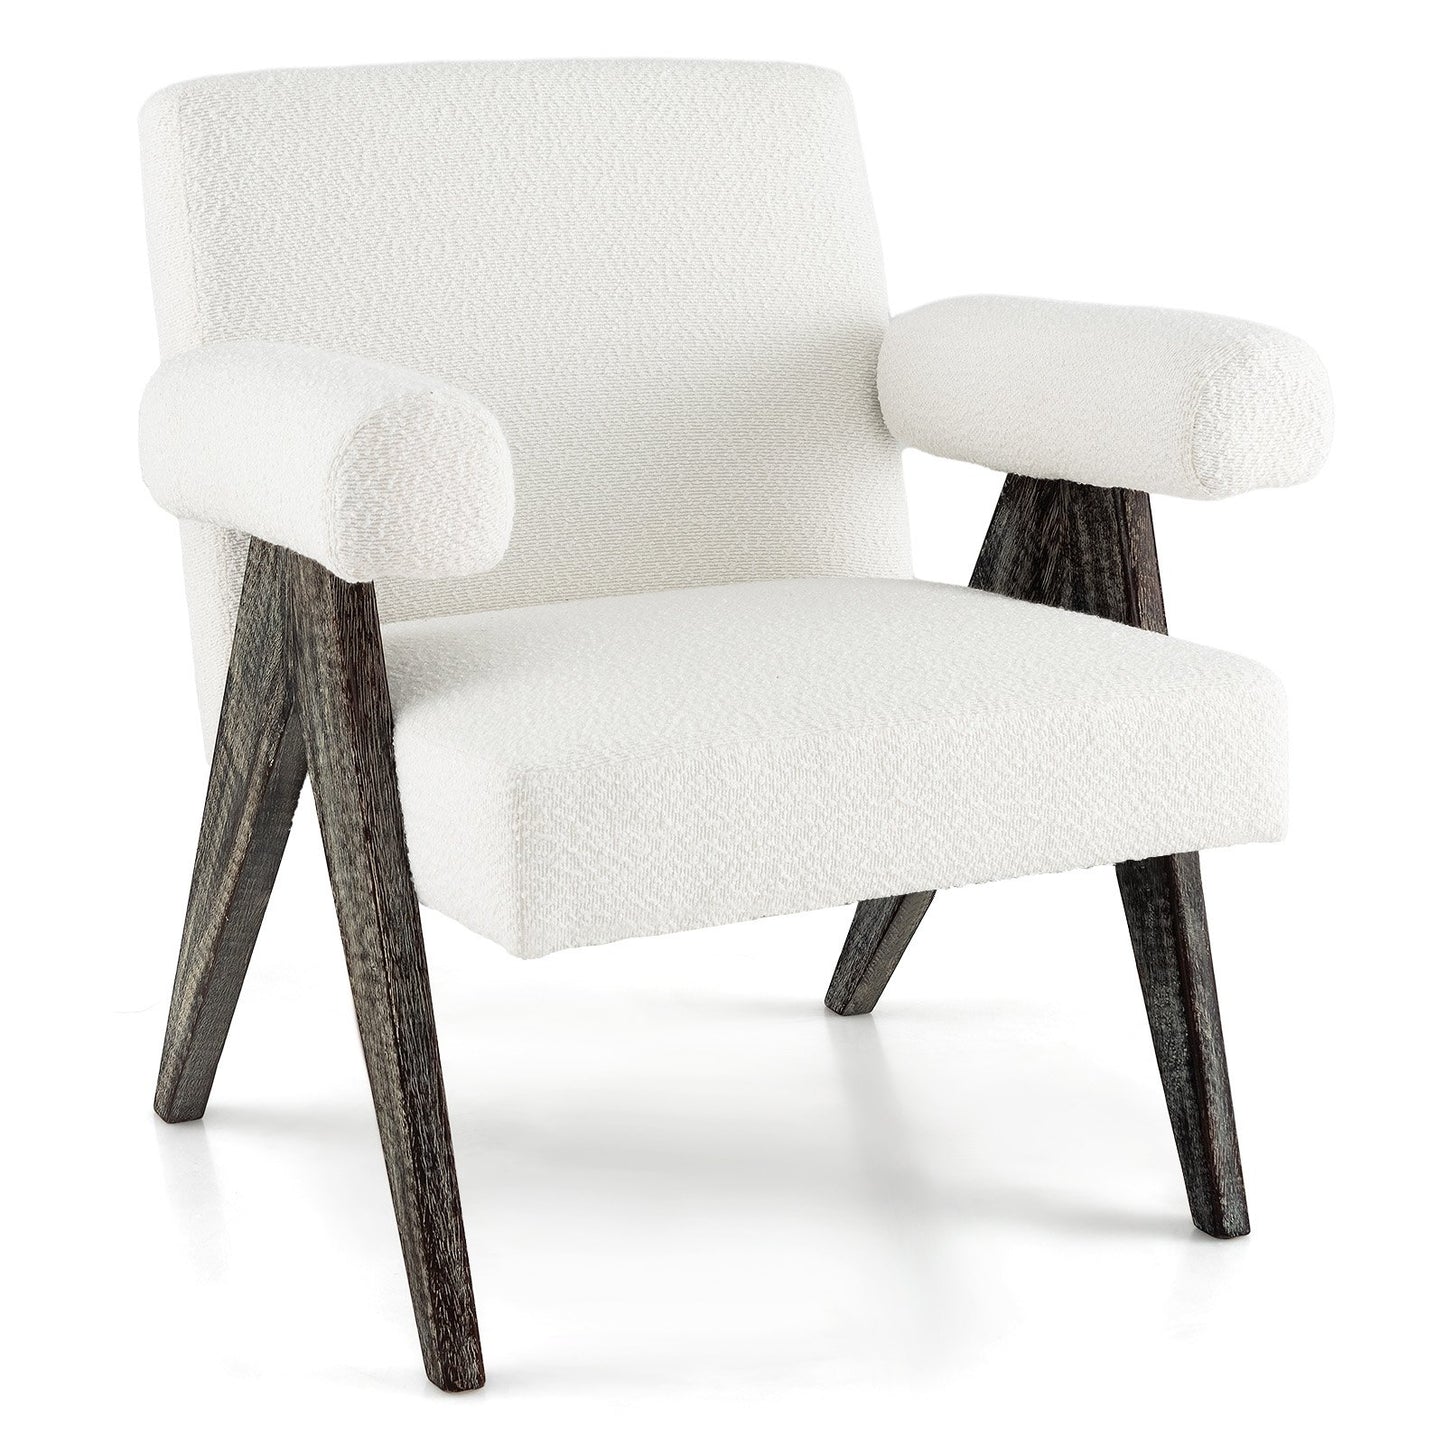 Upholstered Armchair with Natural Rubber Wood Legs and Sponge Padded Seat, White